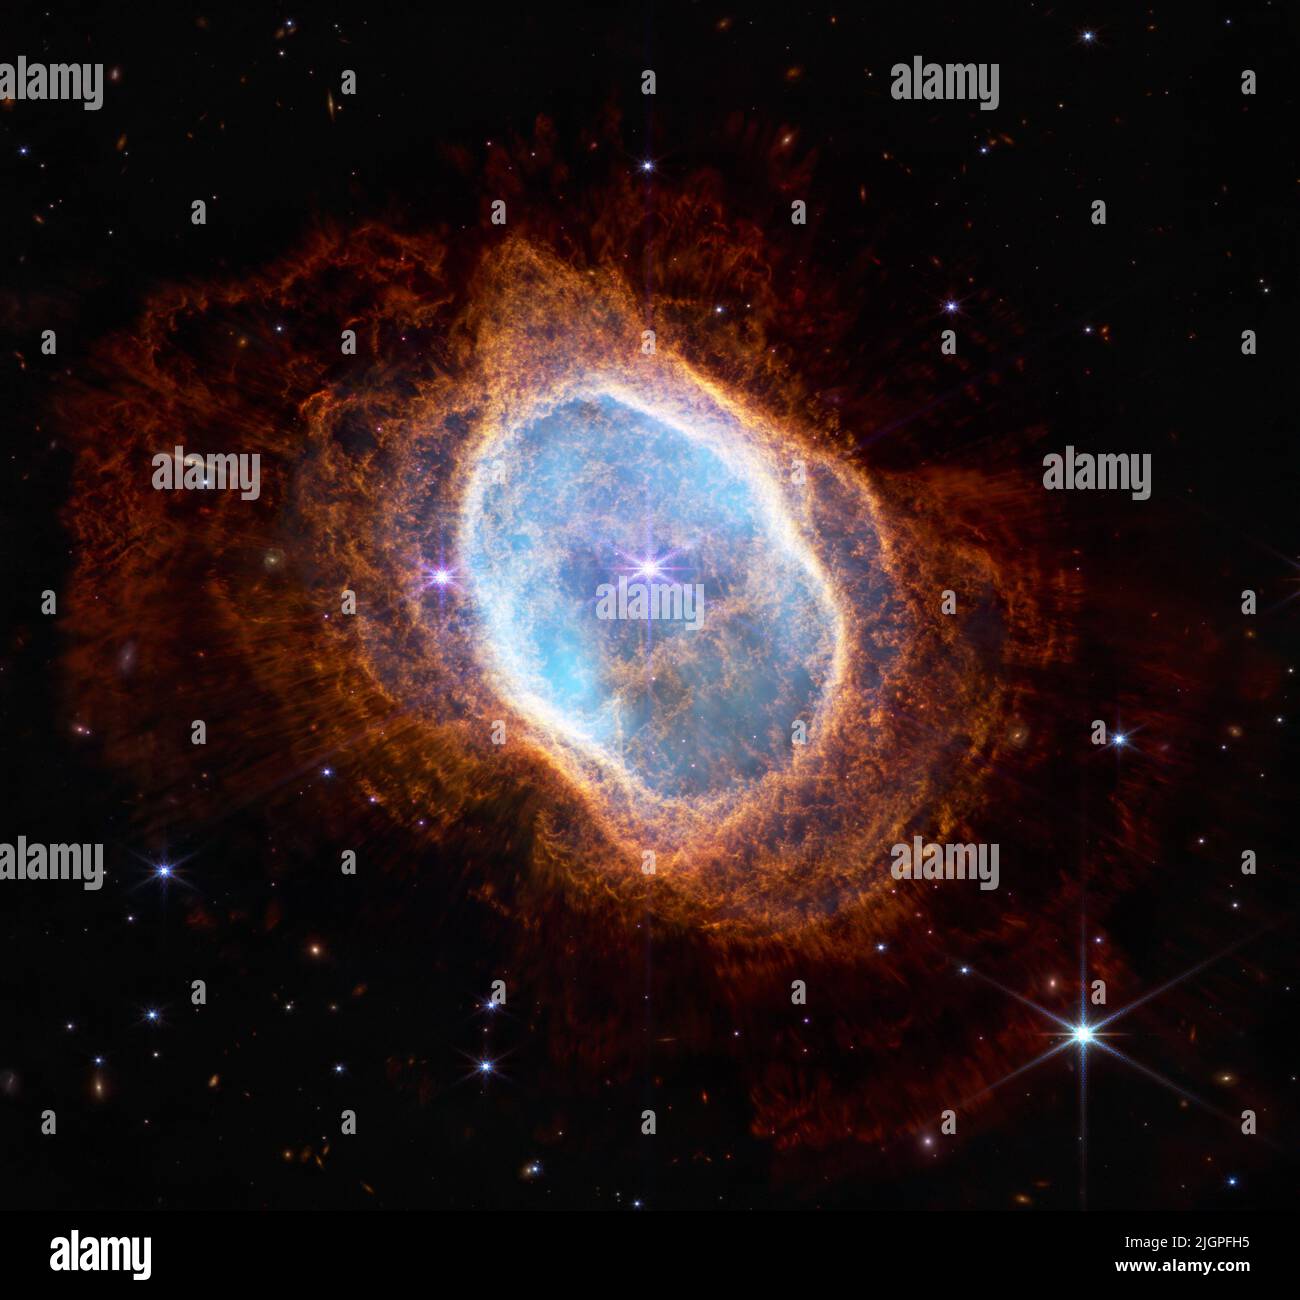 Data from Webb's Near-Infrared Camera (NIRCam) were used to make this extremely detailed image. It is teeming with scientific information - and research will begin following its release on July 12, 2022. The bright star at the center of NGC 3132, while prominent when viewed by NASA's Webb Telescope in near-infrared light, plays a supporting role in sculpting the surrounding nebula. A second star, barely visible at the lower left along one of the bright star's diffraction spikes, is the nebula's source. It has ejected at least eight layers of gas and dust over thousands of years. NASA/UPI Stock Photo